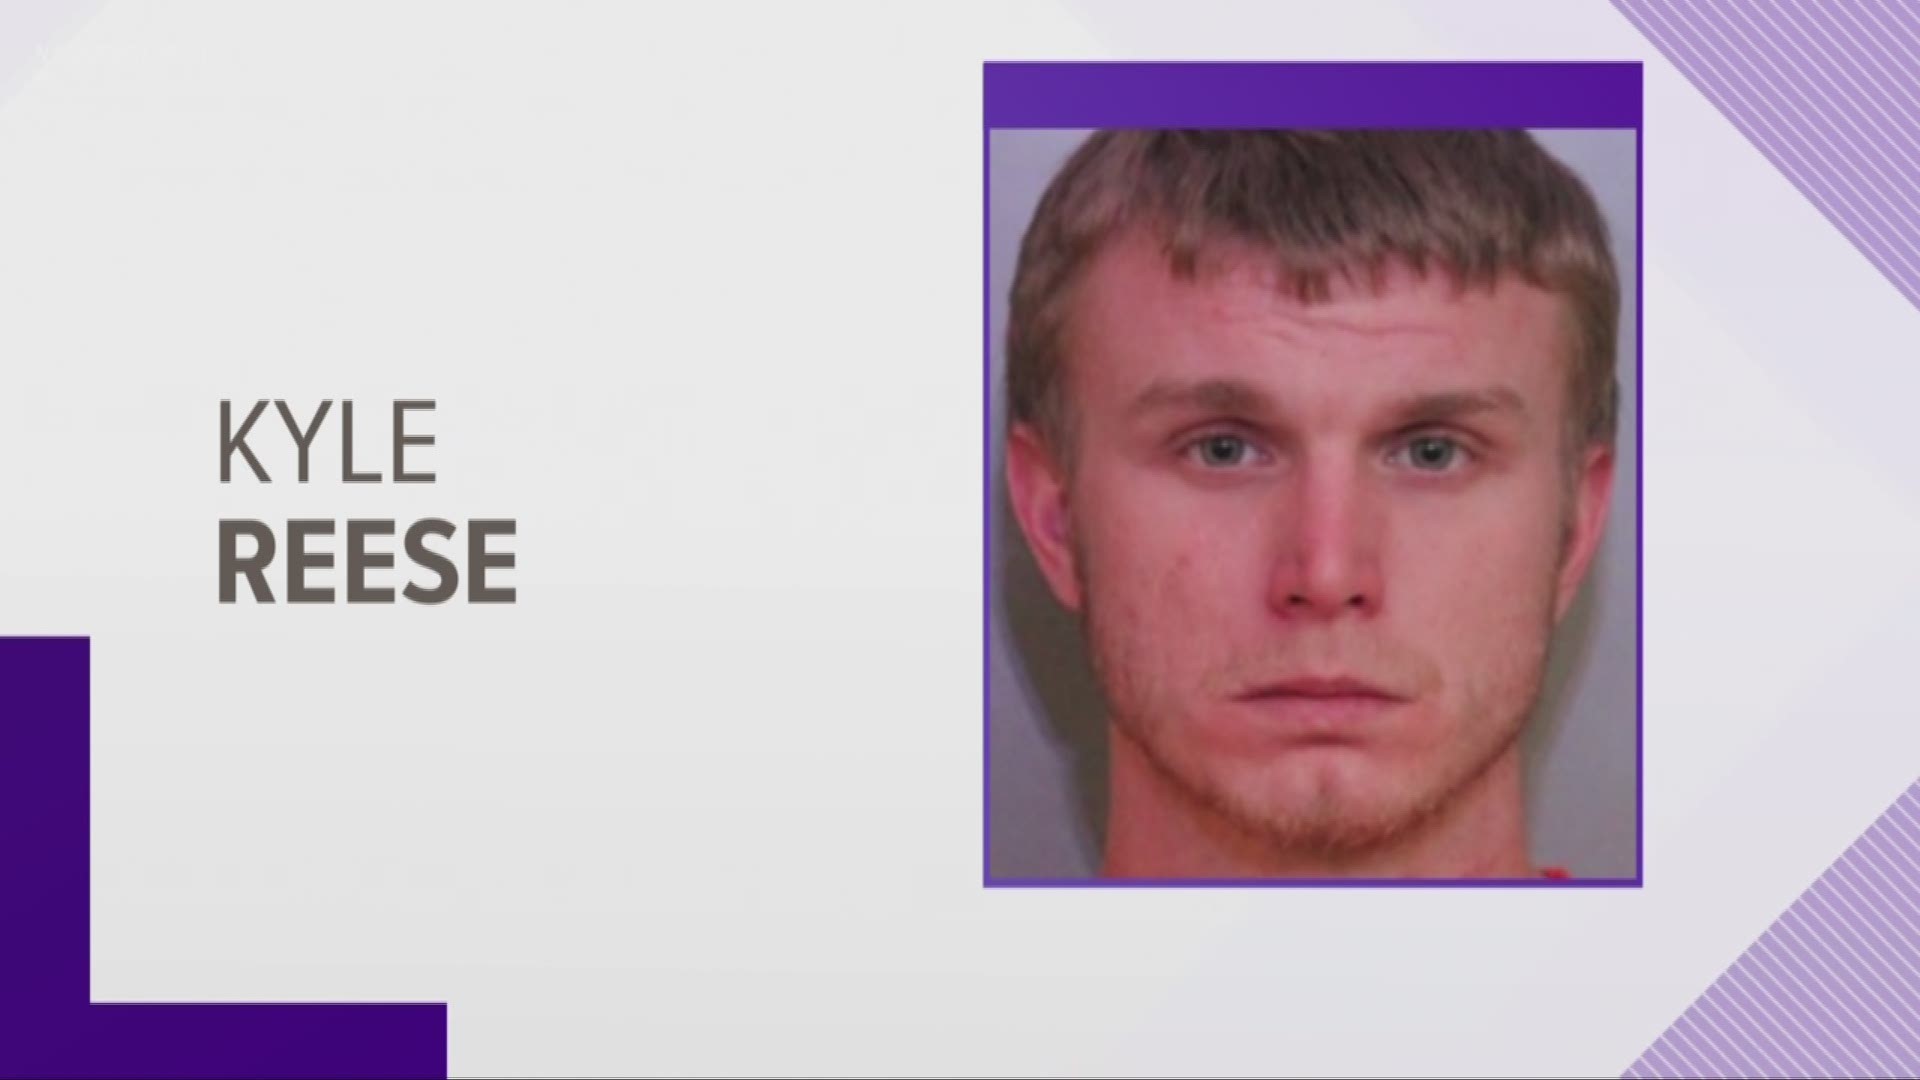 Investigators say Kyle Reese said he dropped the infant girl on her head, but the medical examiner's office says her injuries tell a different story.